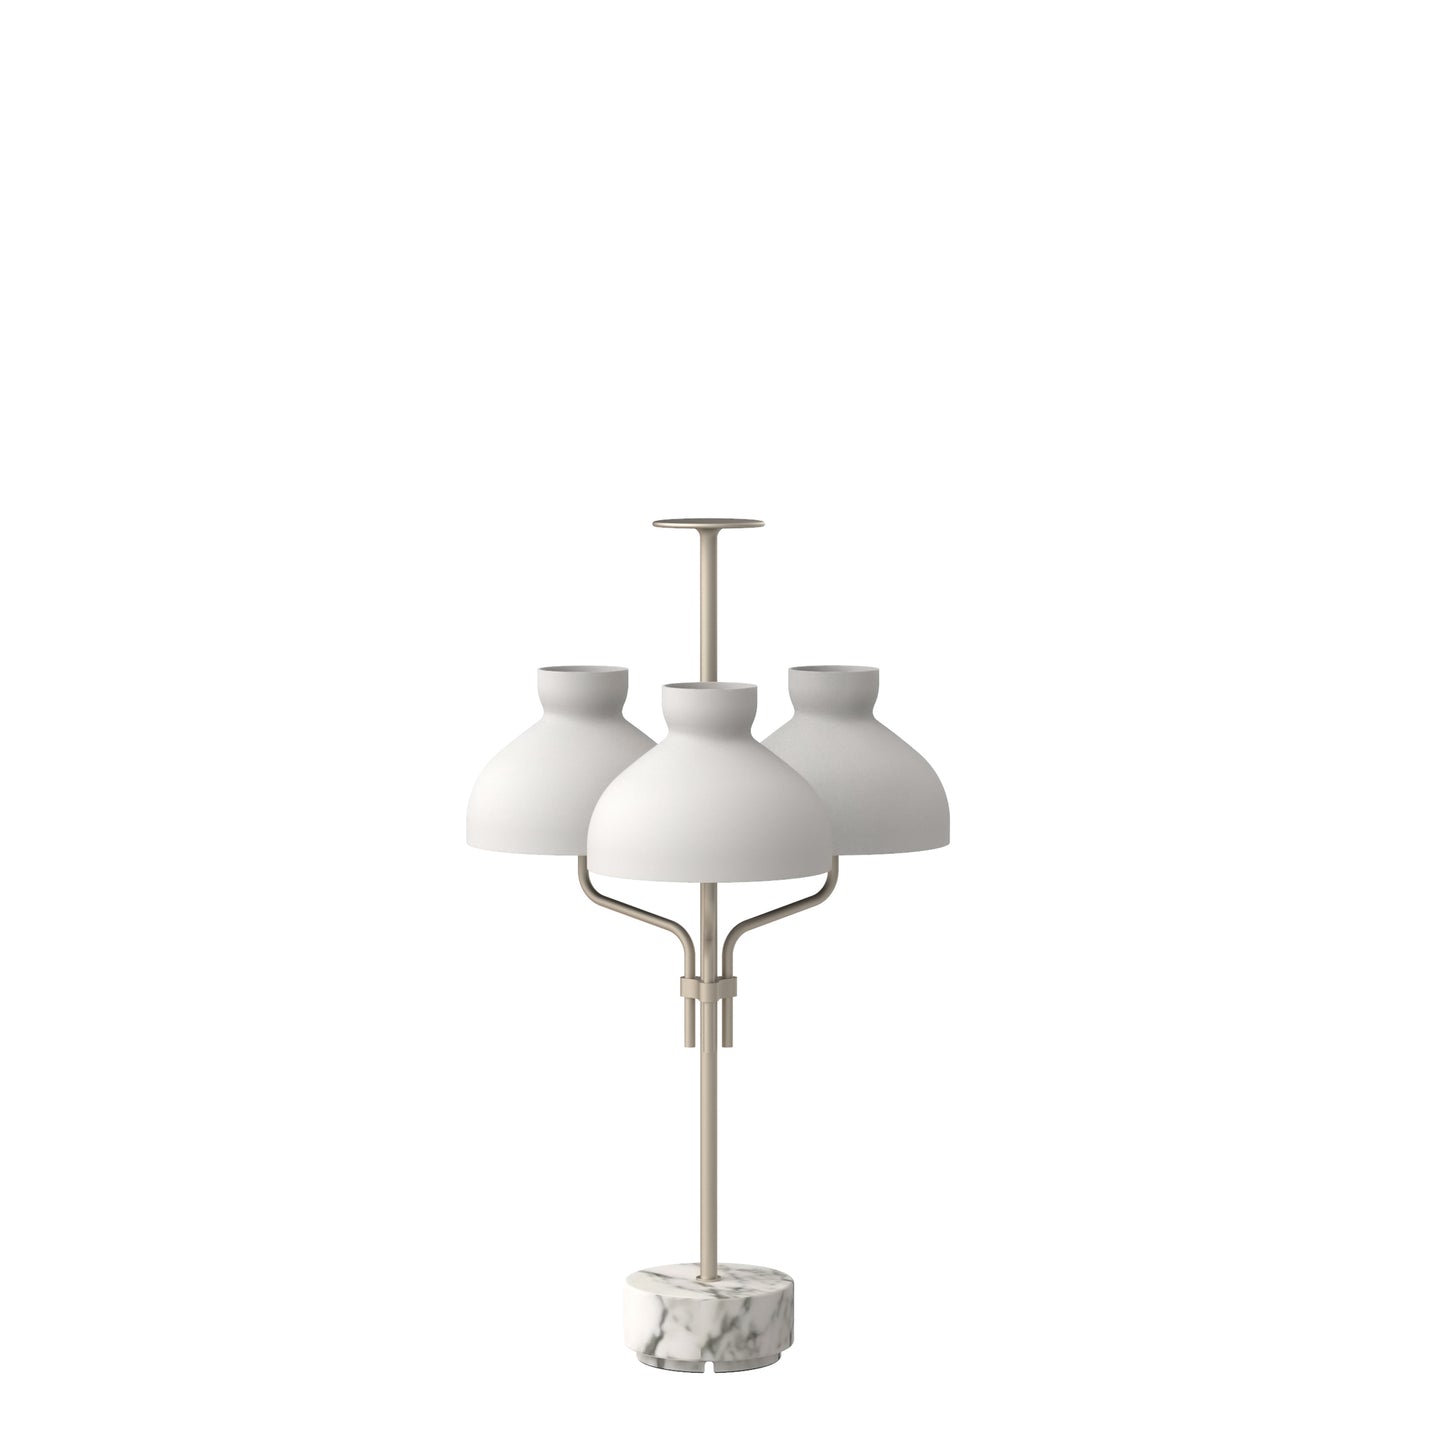 Arenzano Tre Fiamme Table Lamp